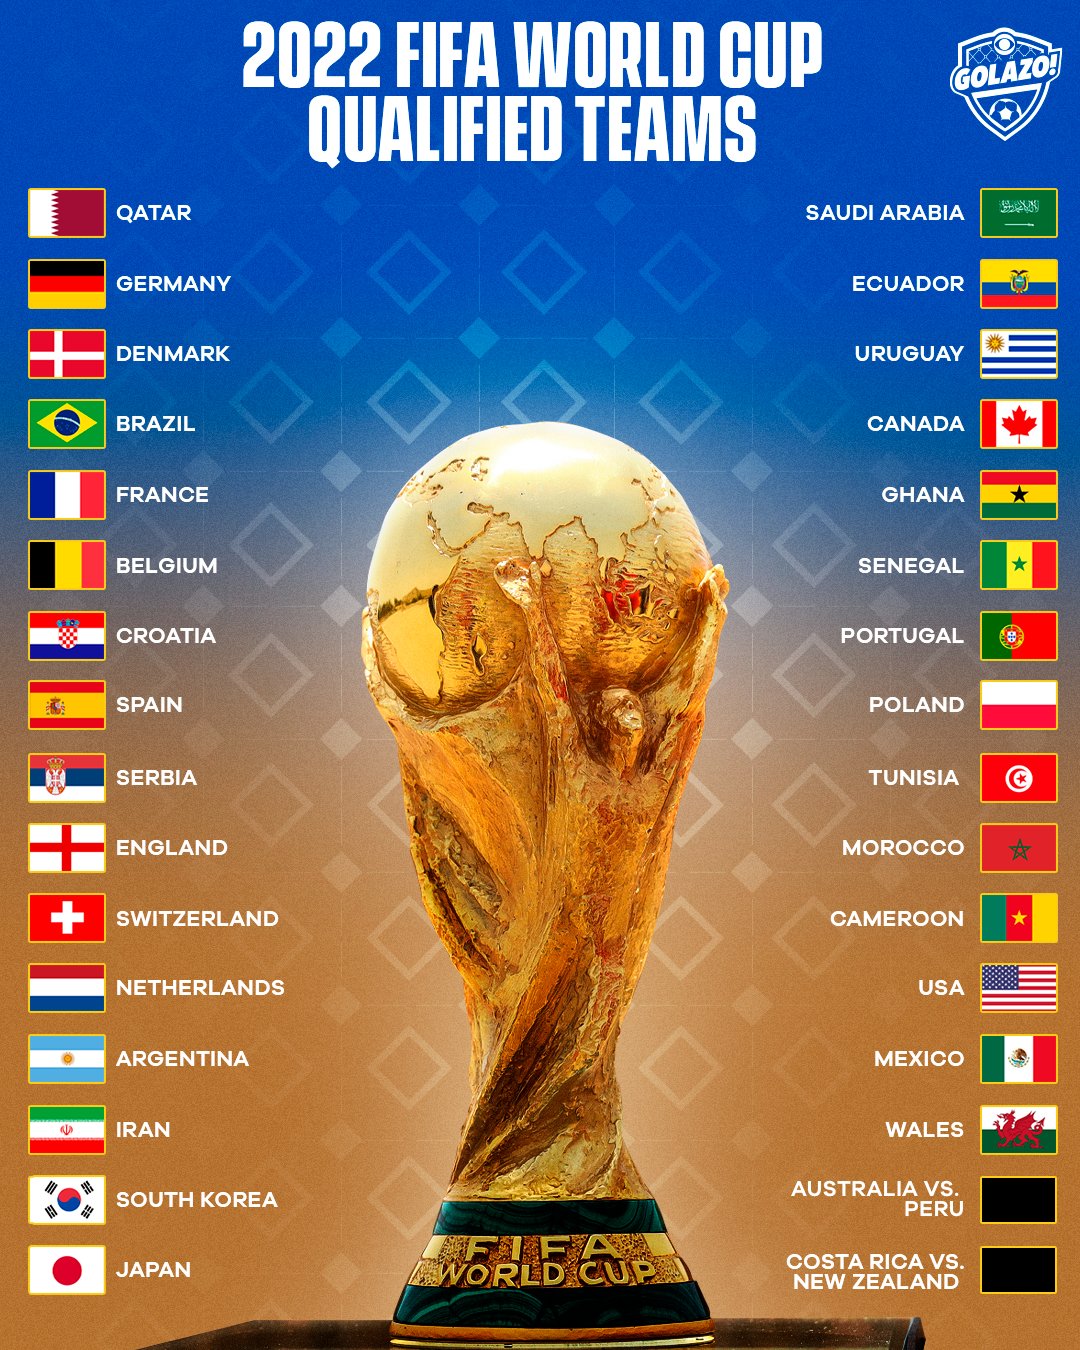 Cbs Sports Golazo 30 Teams Have Qualified Only Two Spots Remain In The 22 Fifa World Cup Australia Vs Peru Costa Rica Vs New Zealand T Co Znpf2ycf4r Twitter